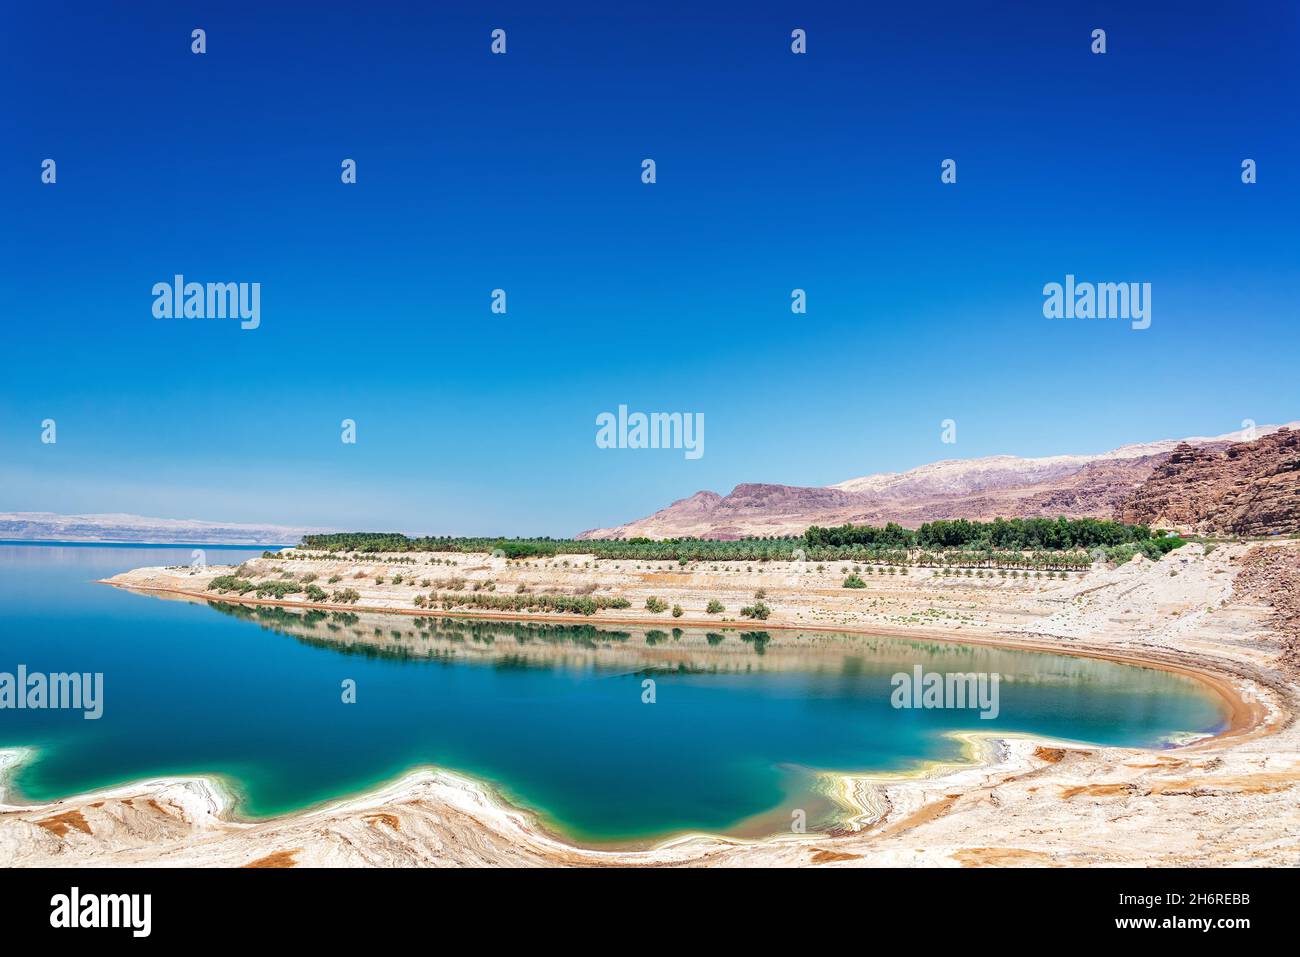 View salt and turquoise water at the Dead Sea in Jordan Stock Photo